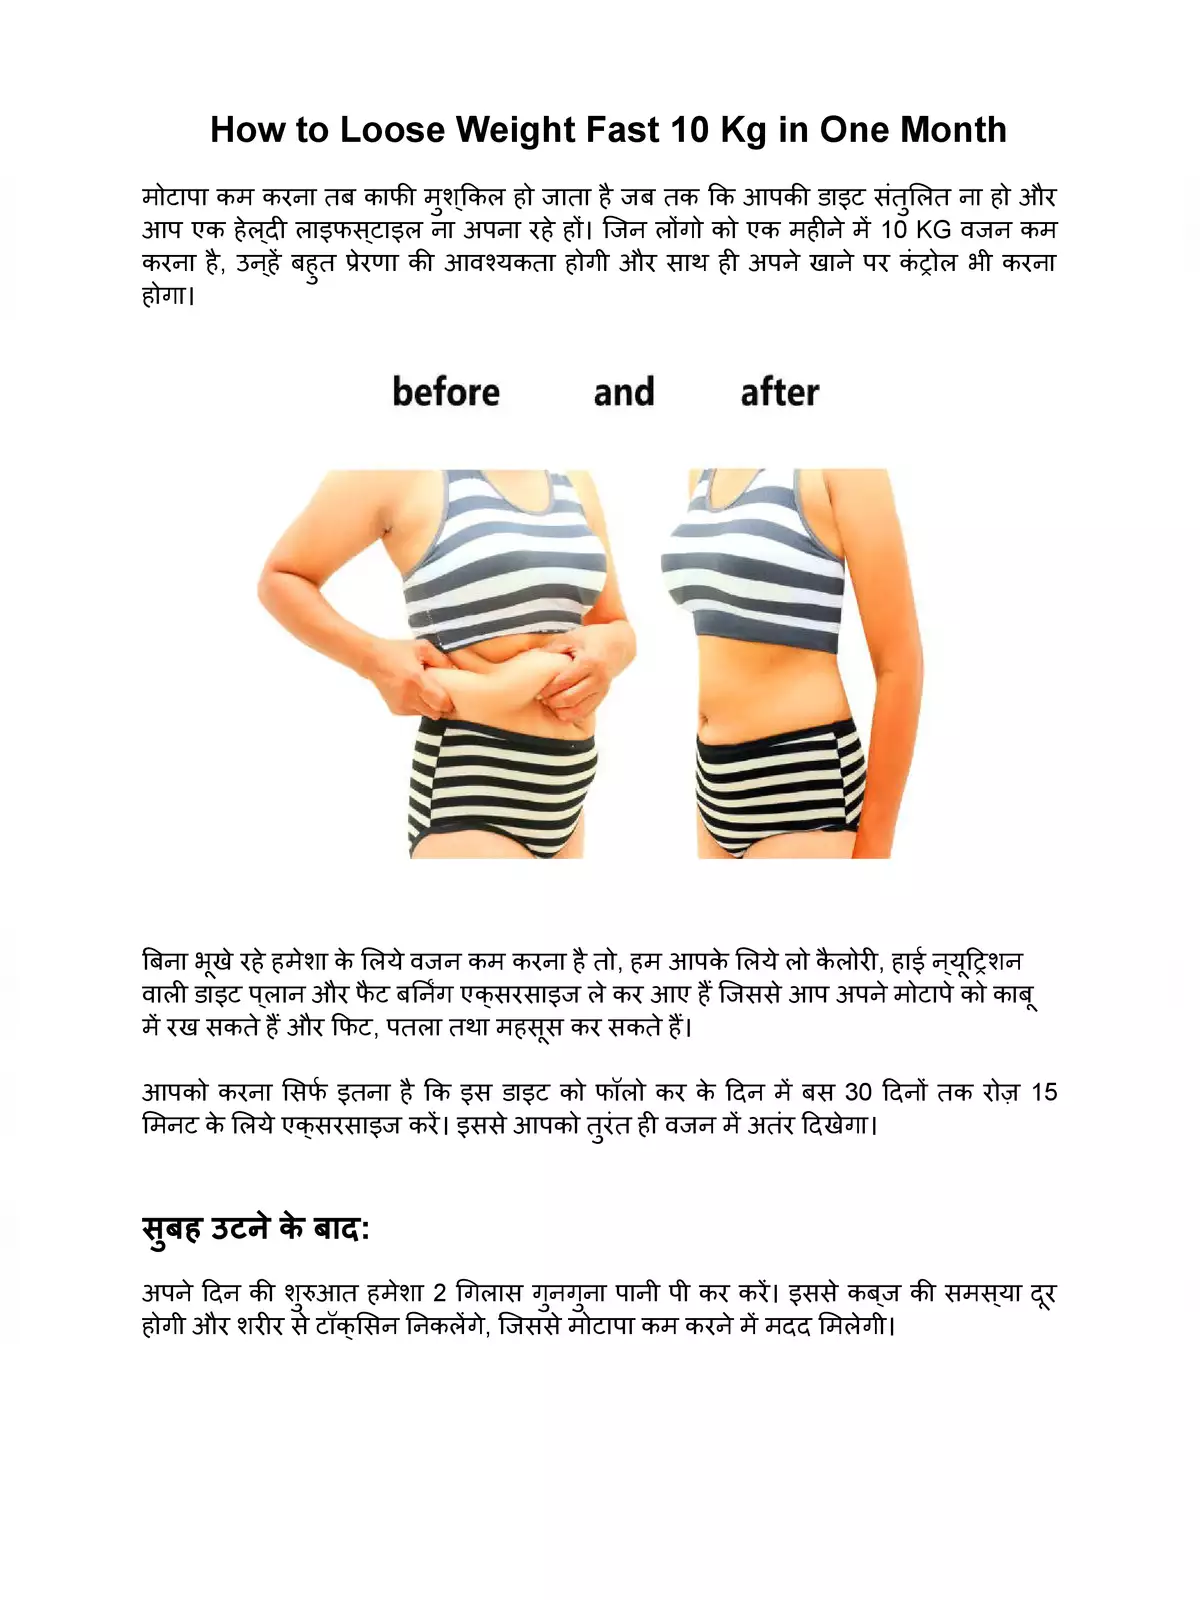 diet-plan-weight-loss-10kg-a-month-hindi-pdf